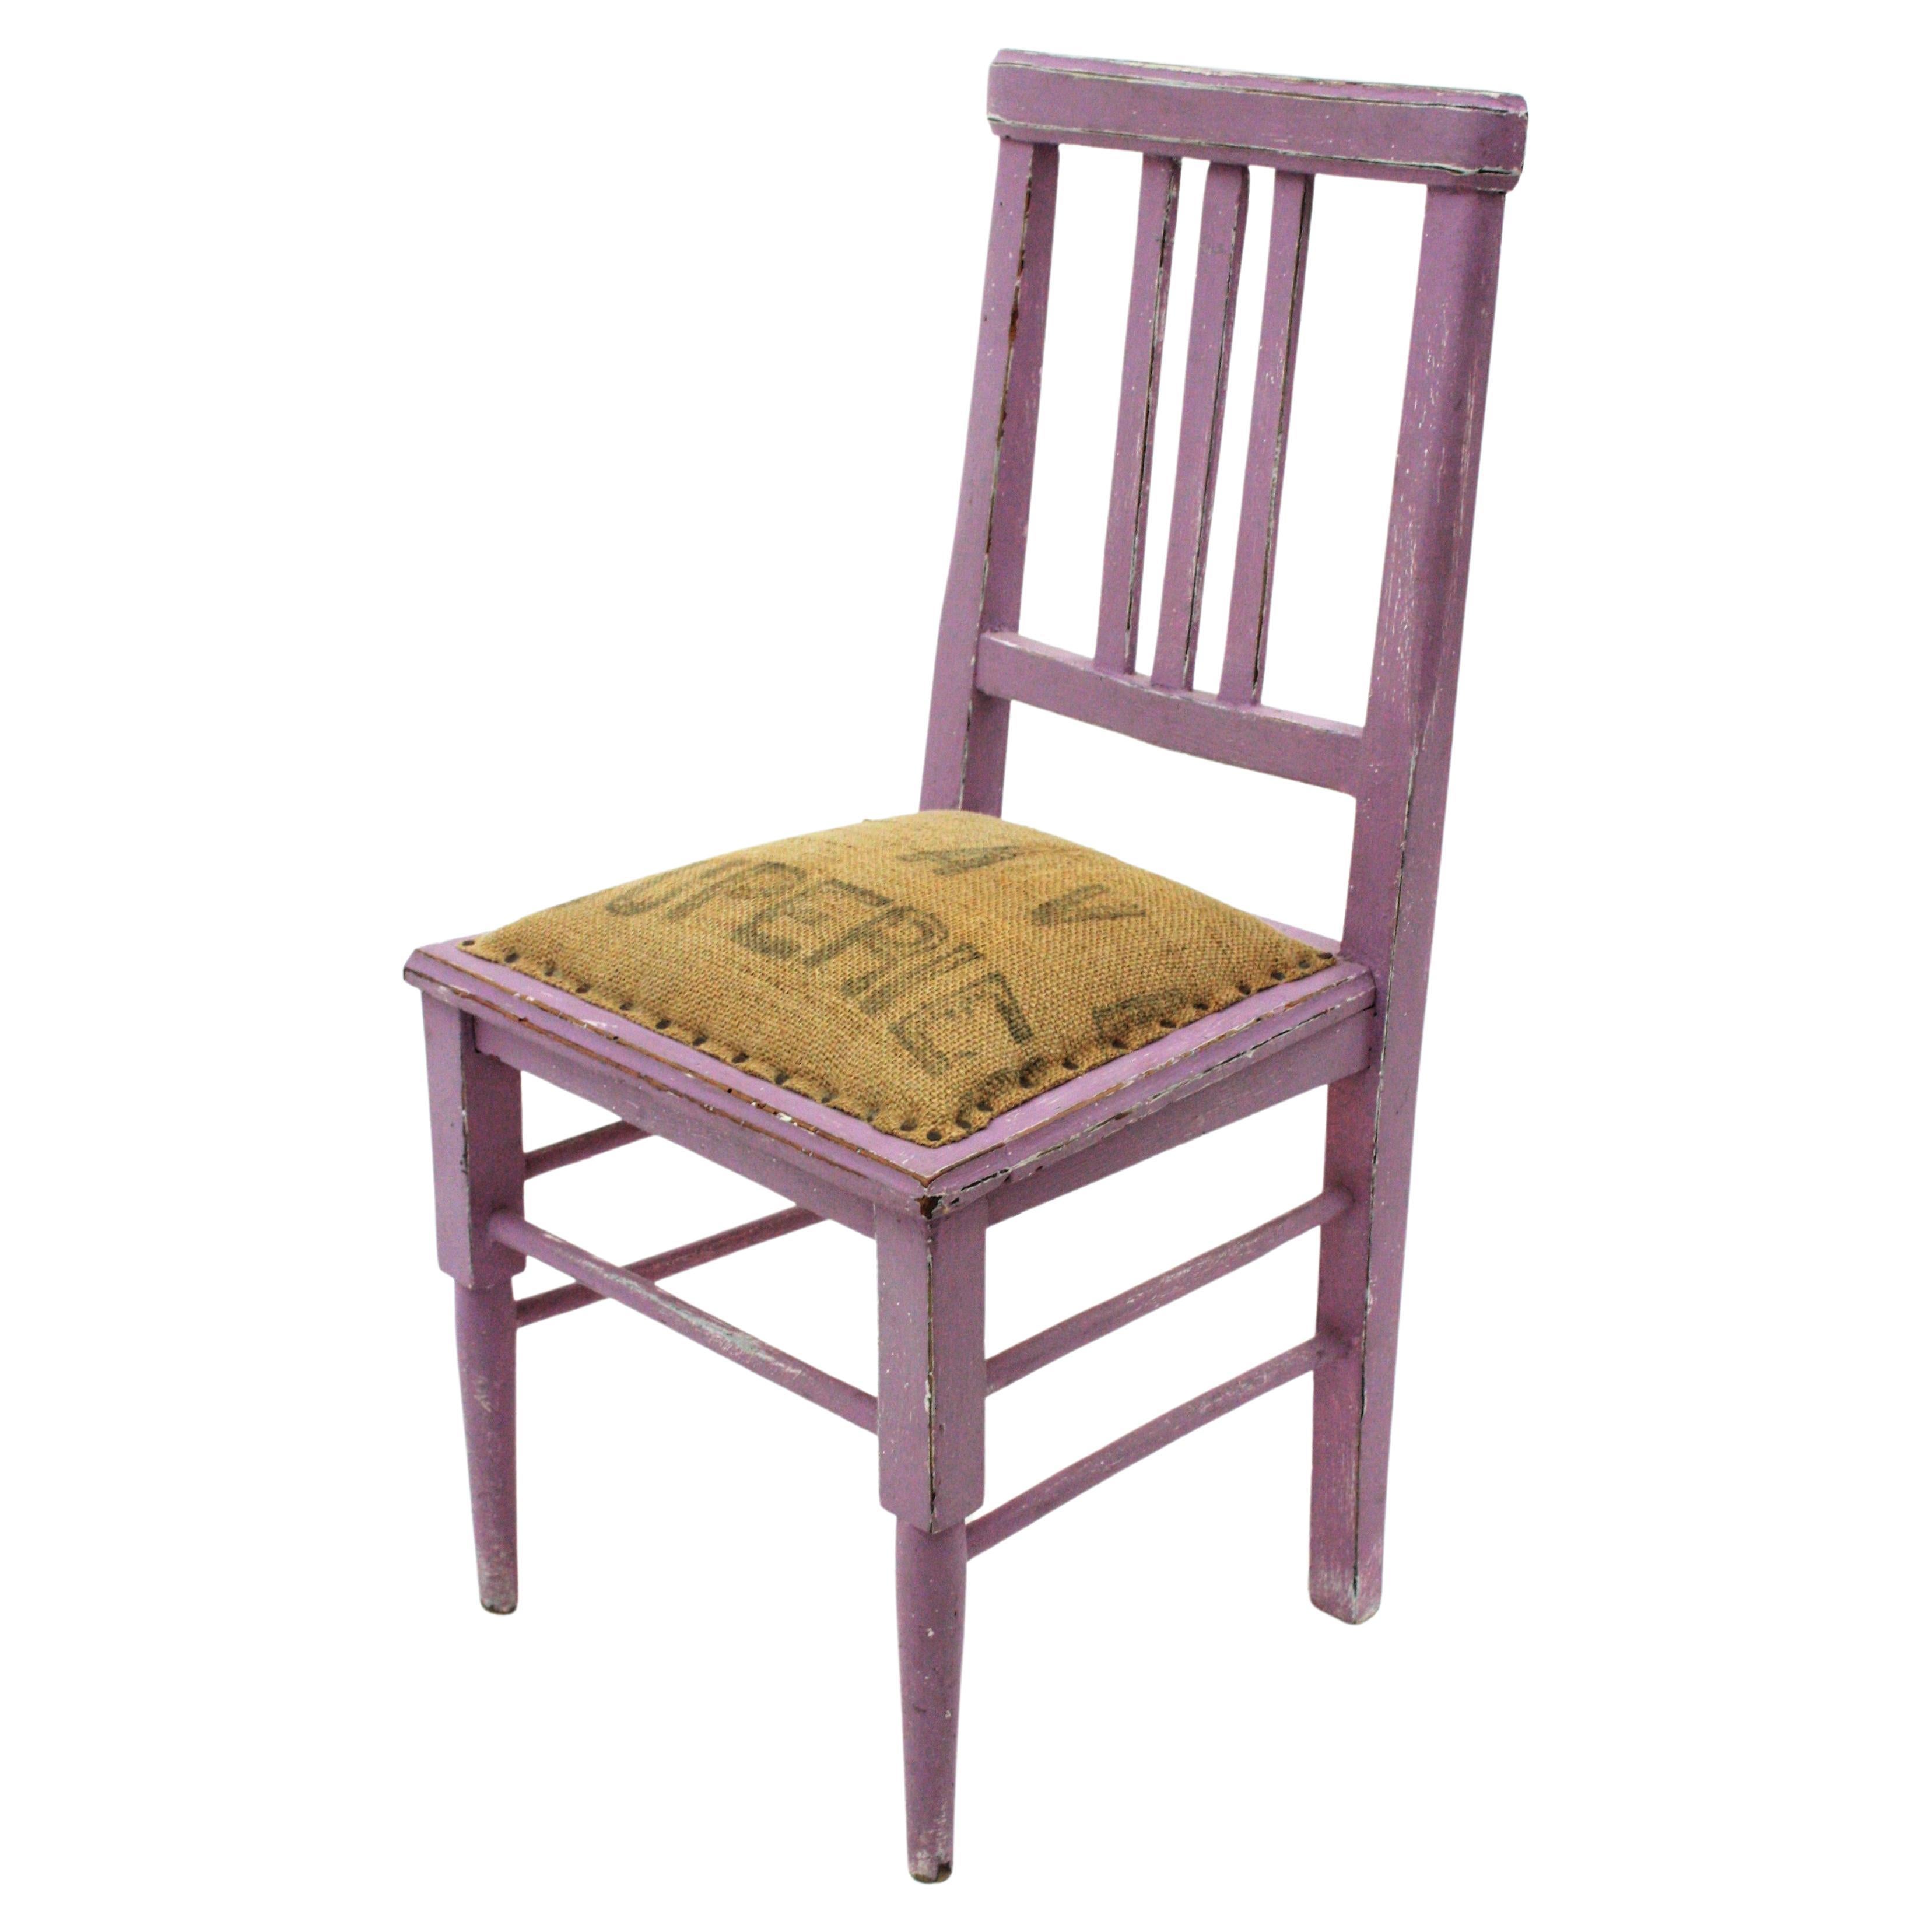 French Provencal Kids Chair in Lavender Patina and Burlap Seat